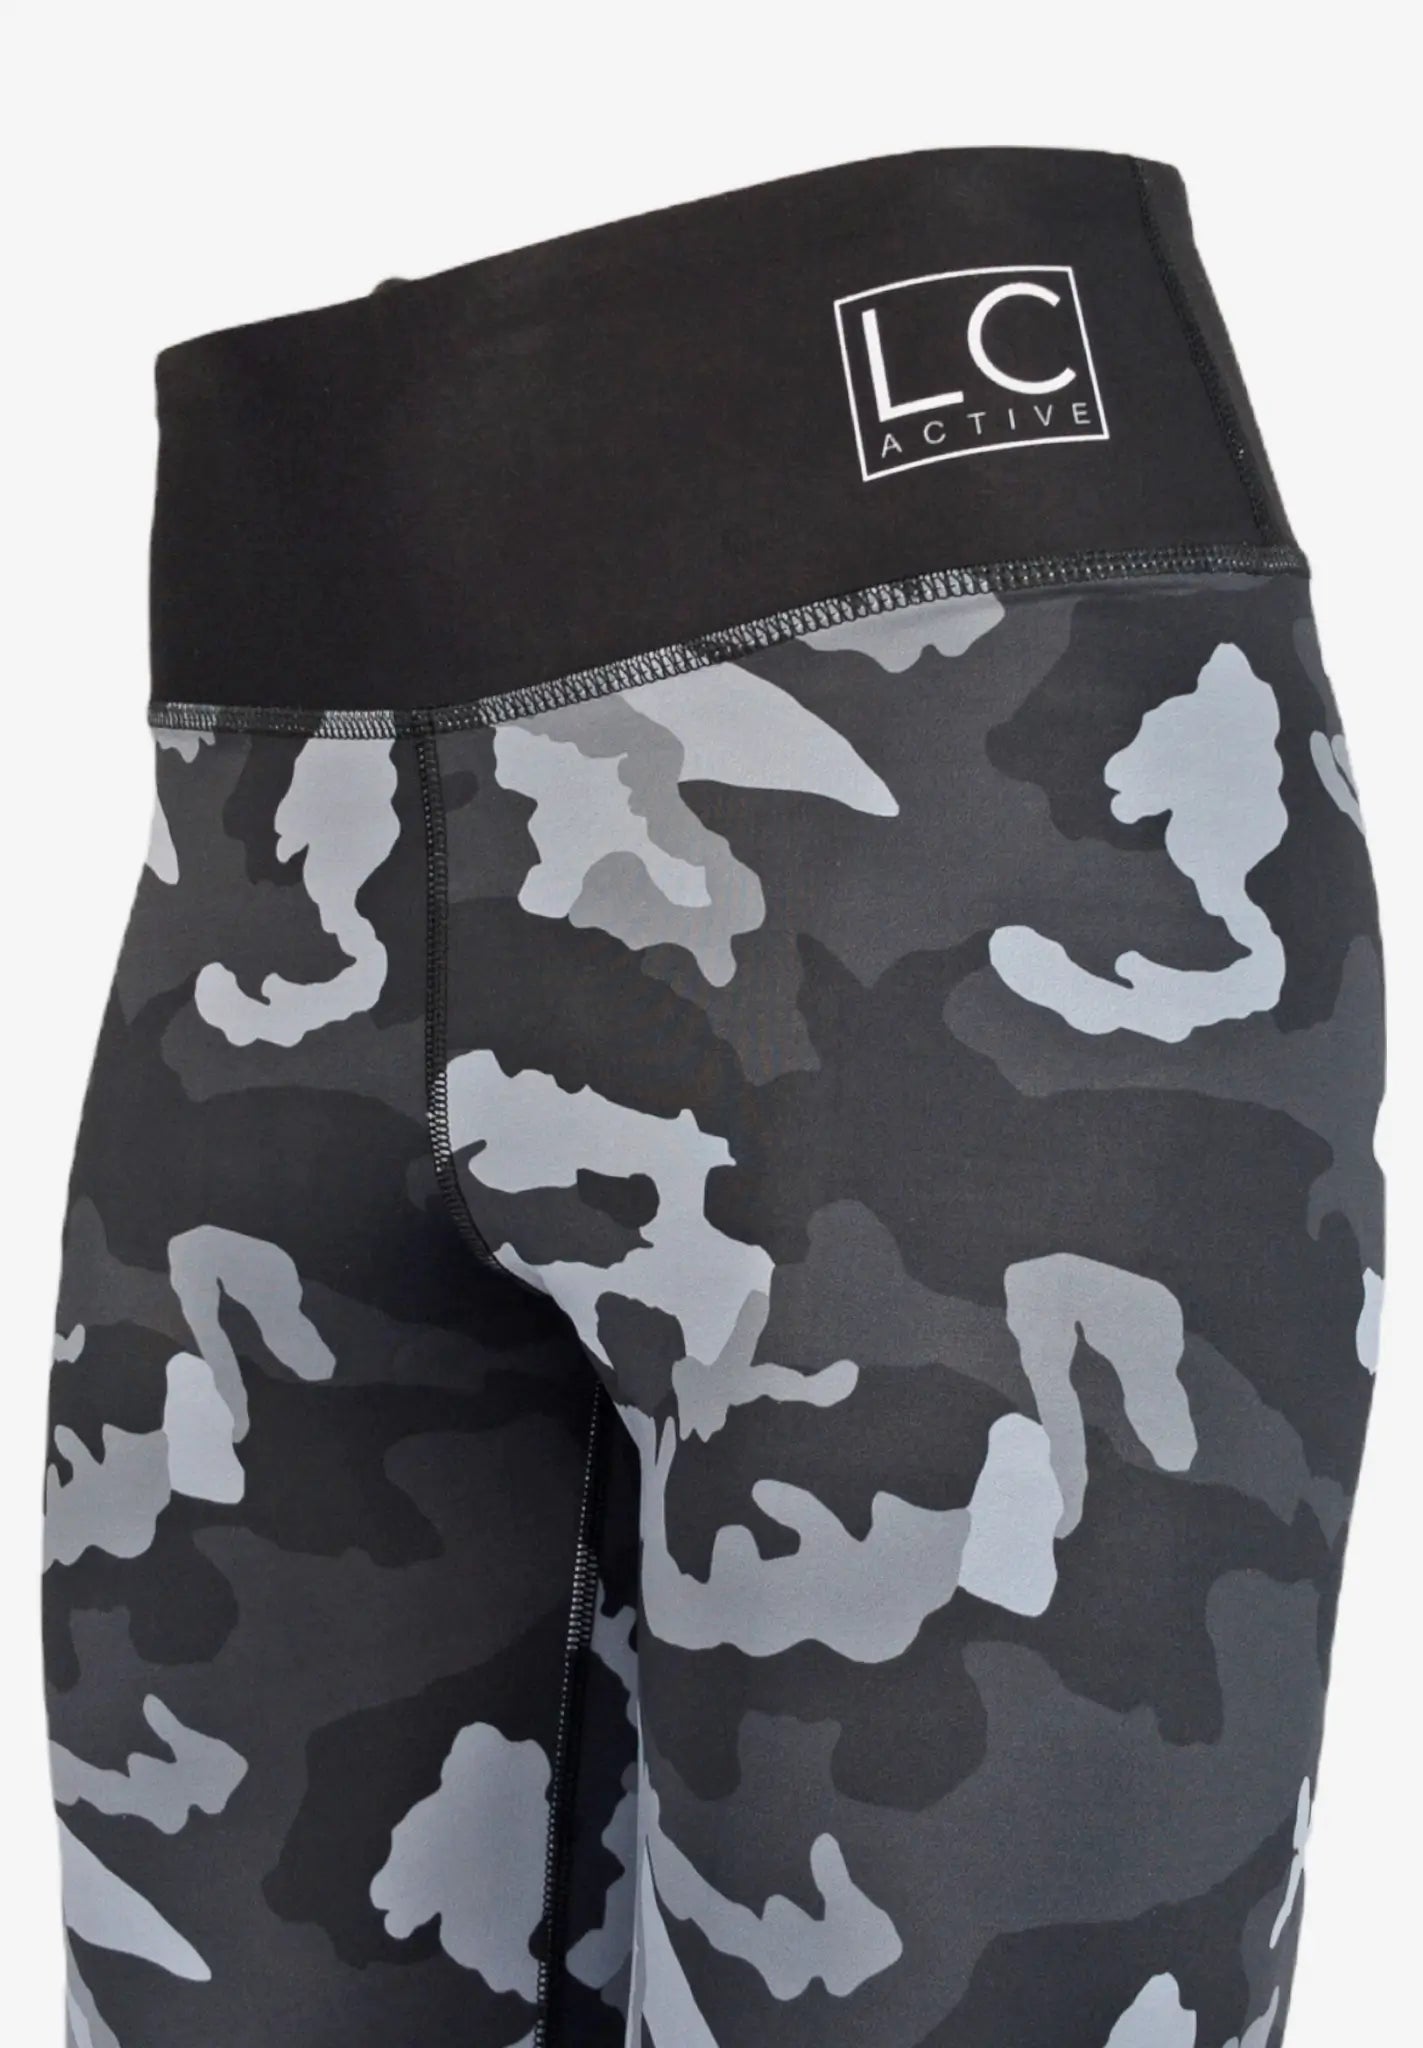 High-Waisted-Gym-Leggings-For-Women-camo camouflage grey black Leggings LC-Active